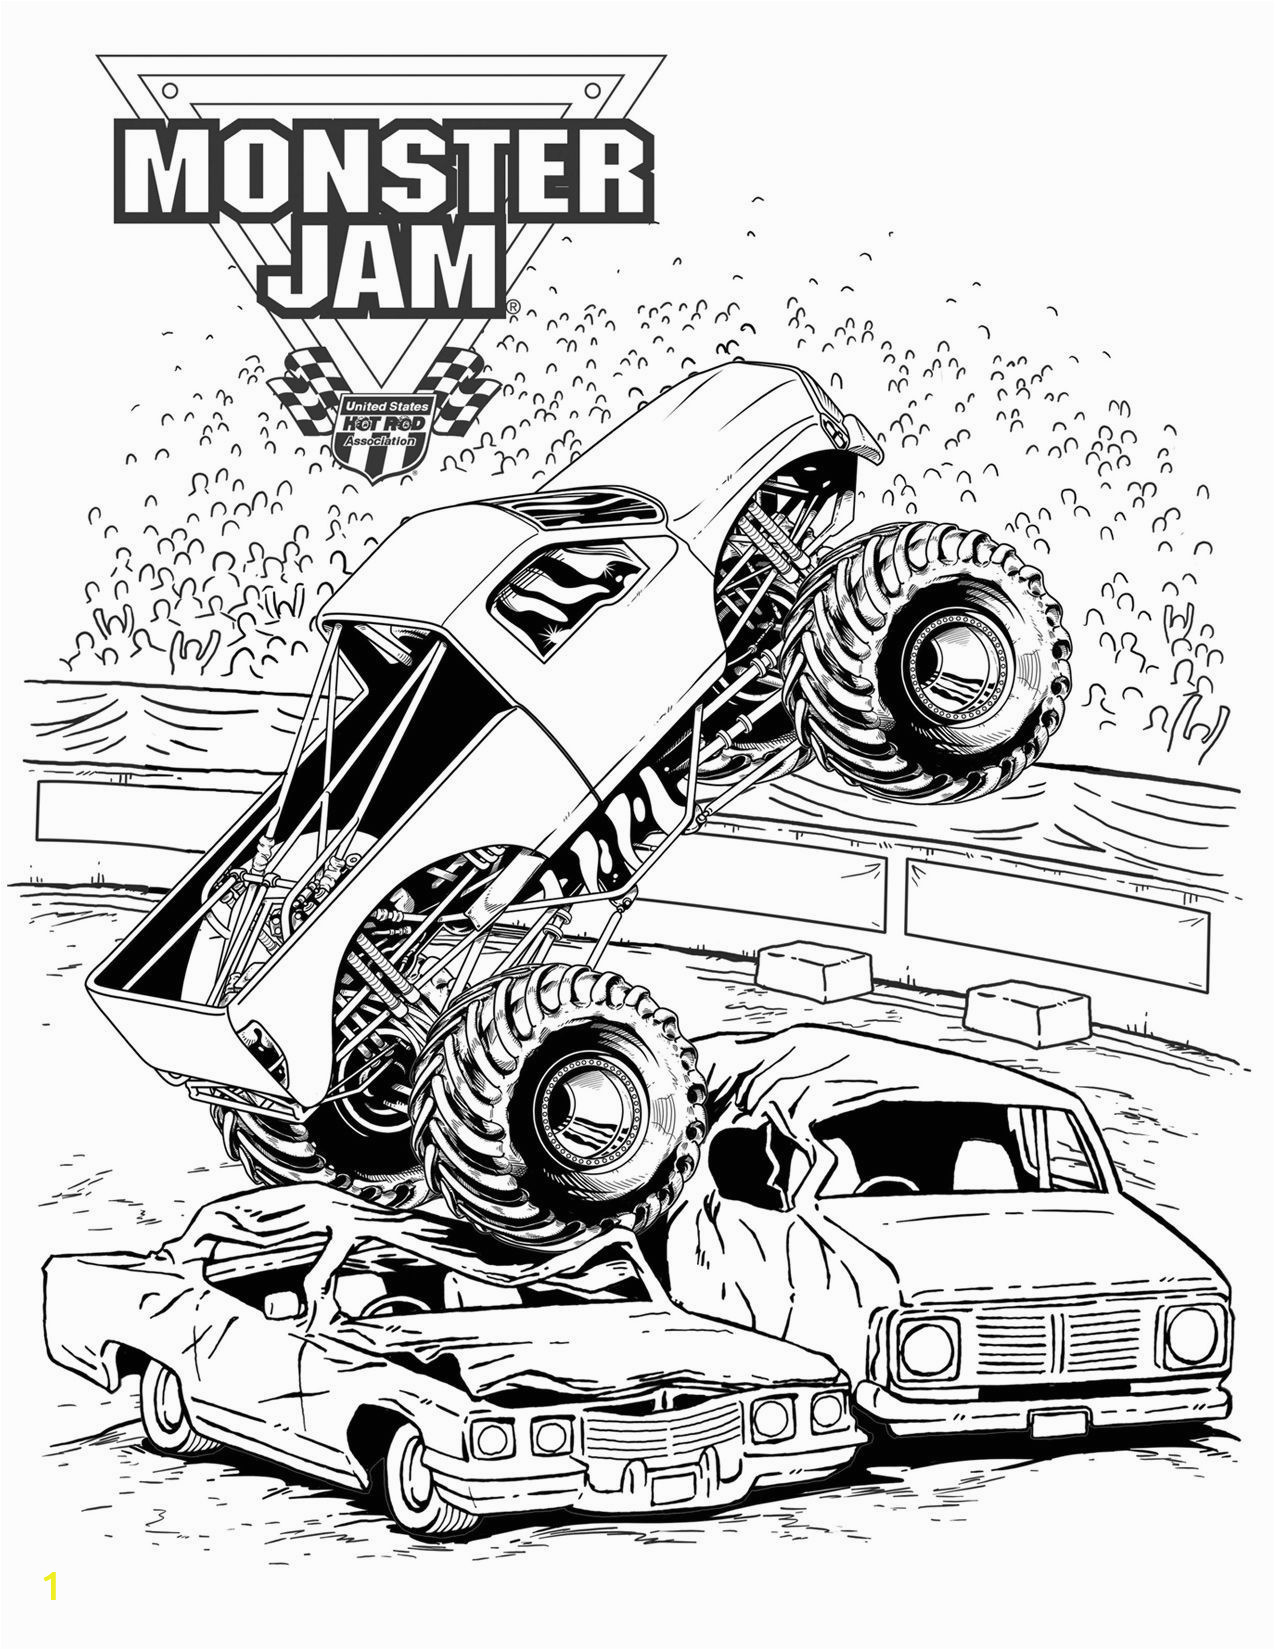 Hot Wheels Monster Trucks Coloring Pages Have You Purchased Your Tickets for Monster Jam yet